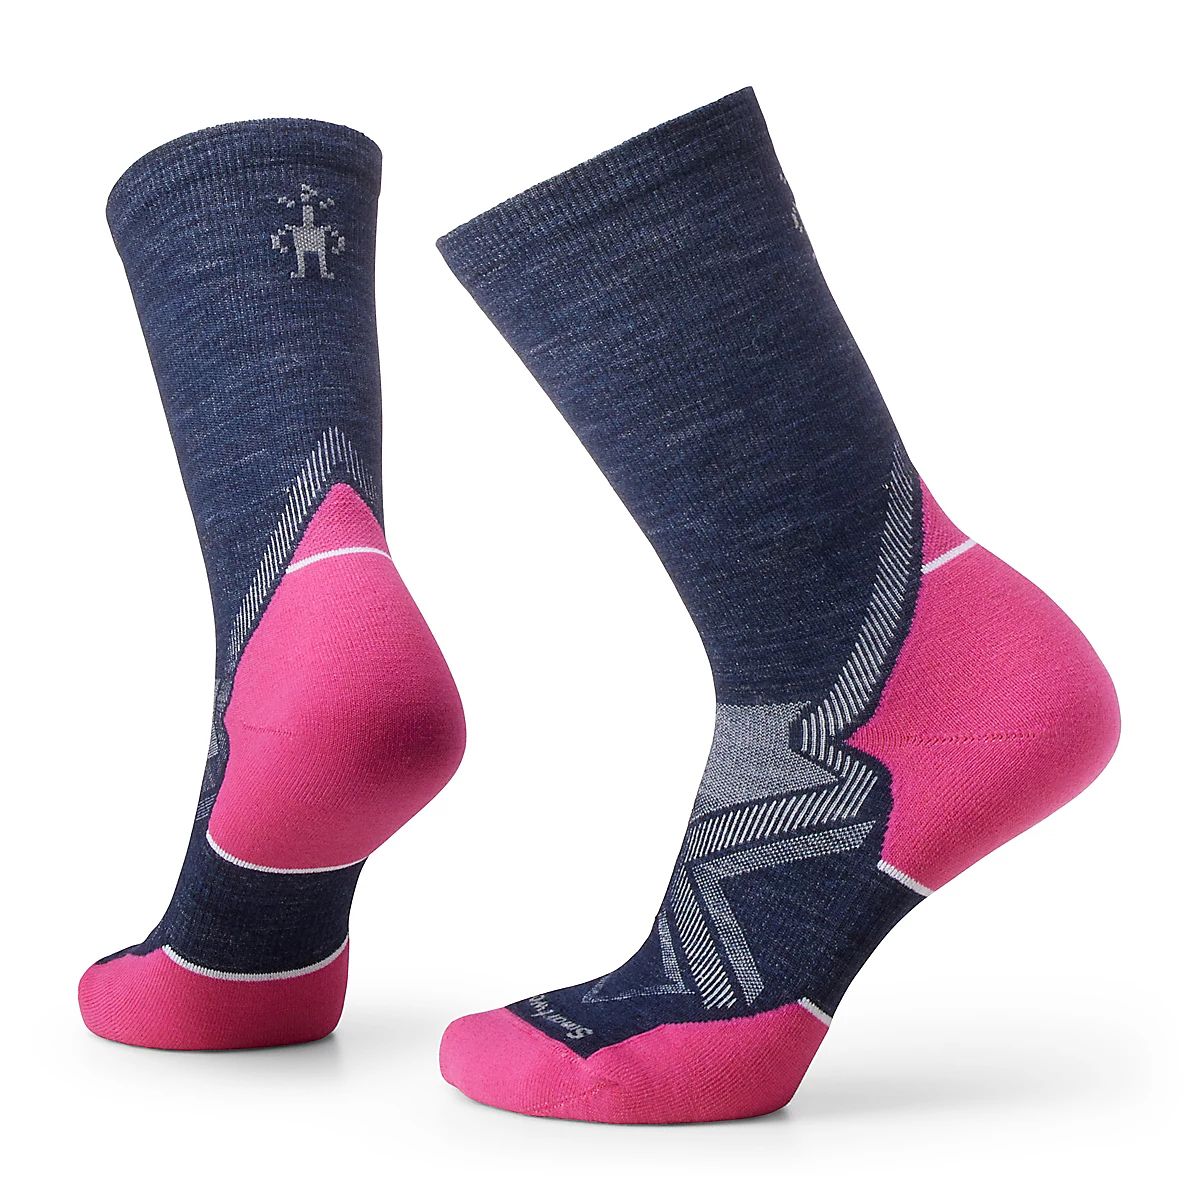 Women's Run Cold Weather Targeted Cushion Crew Socks | Smartwool US